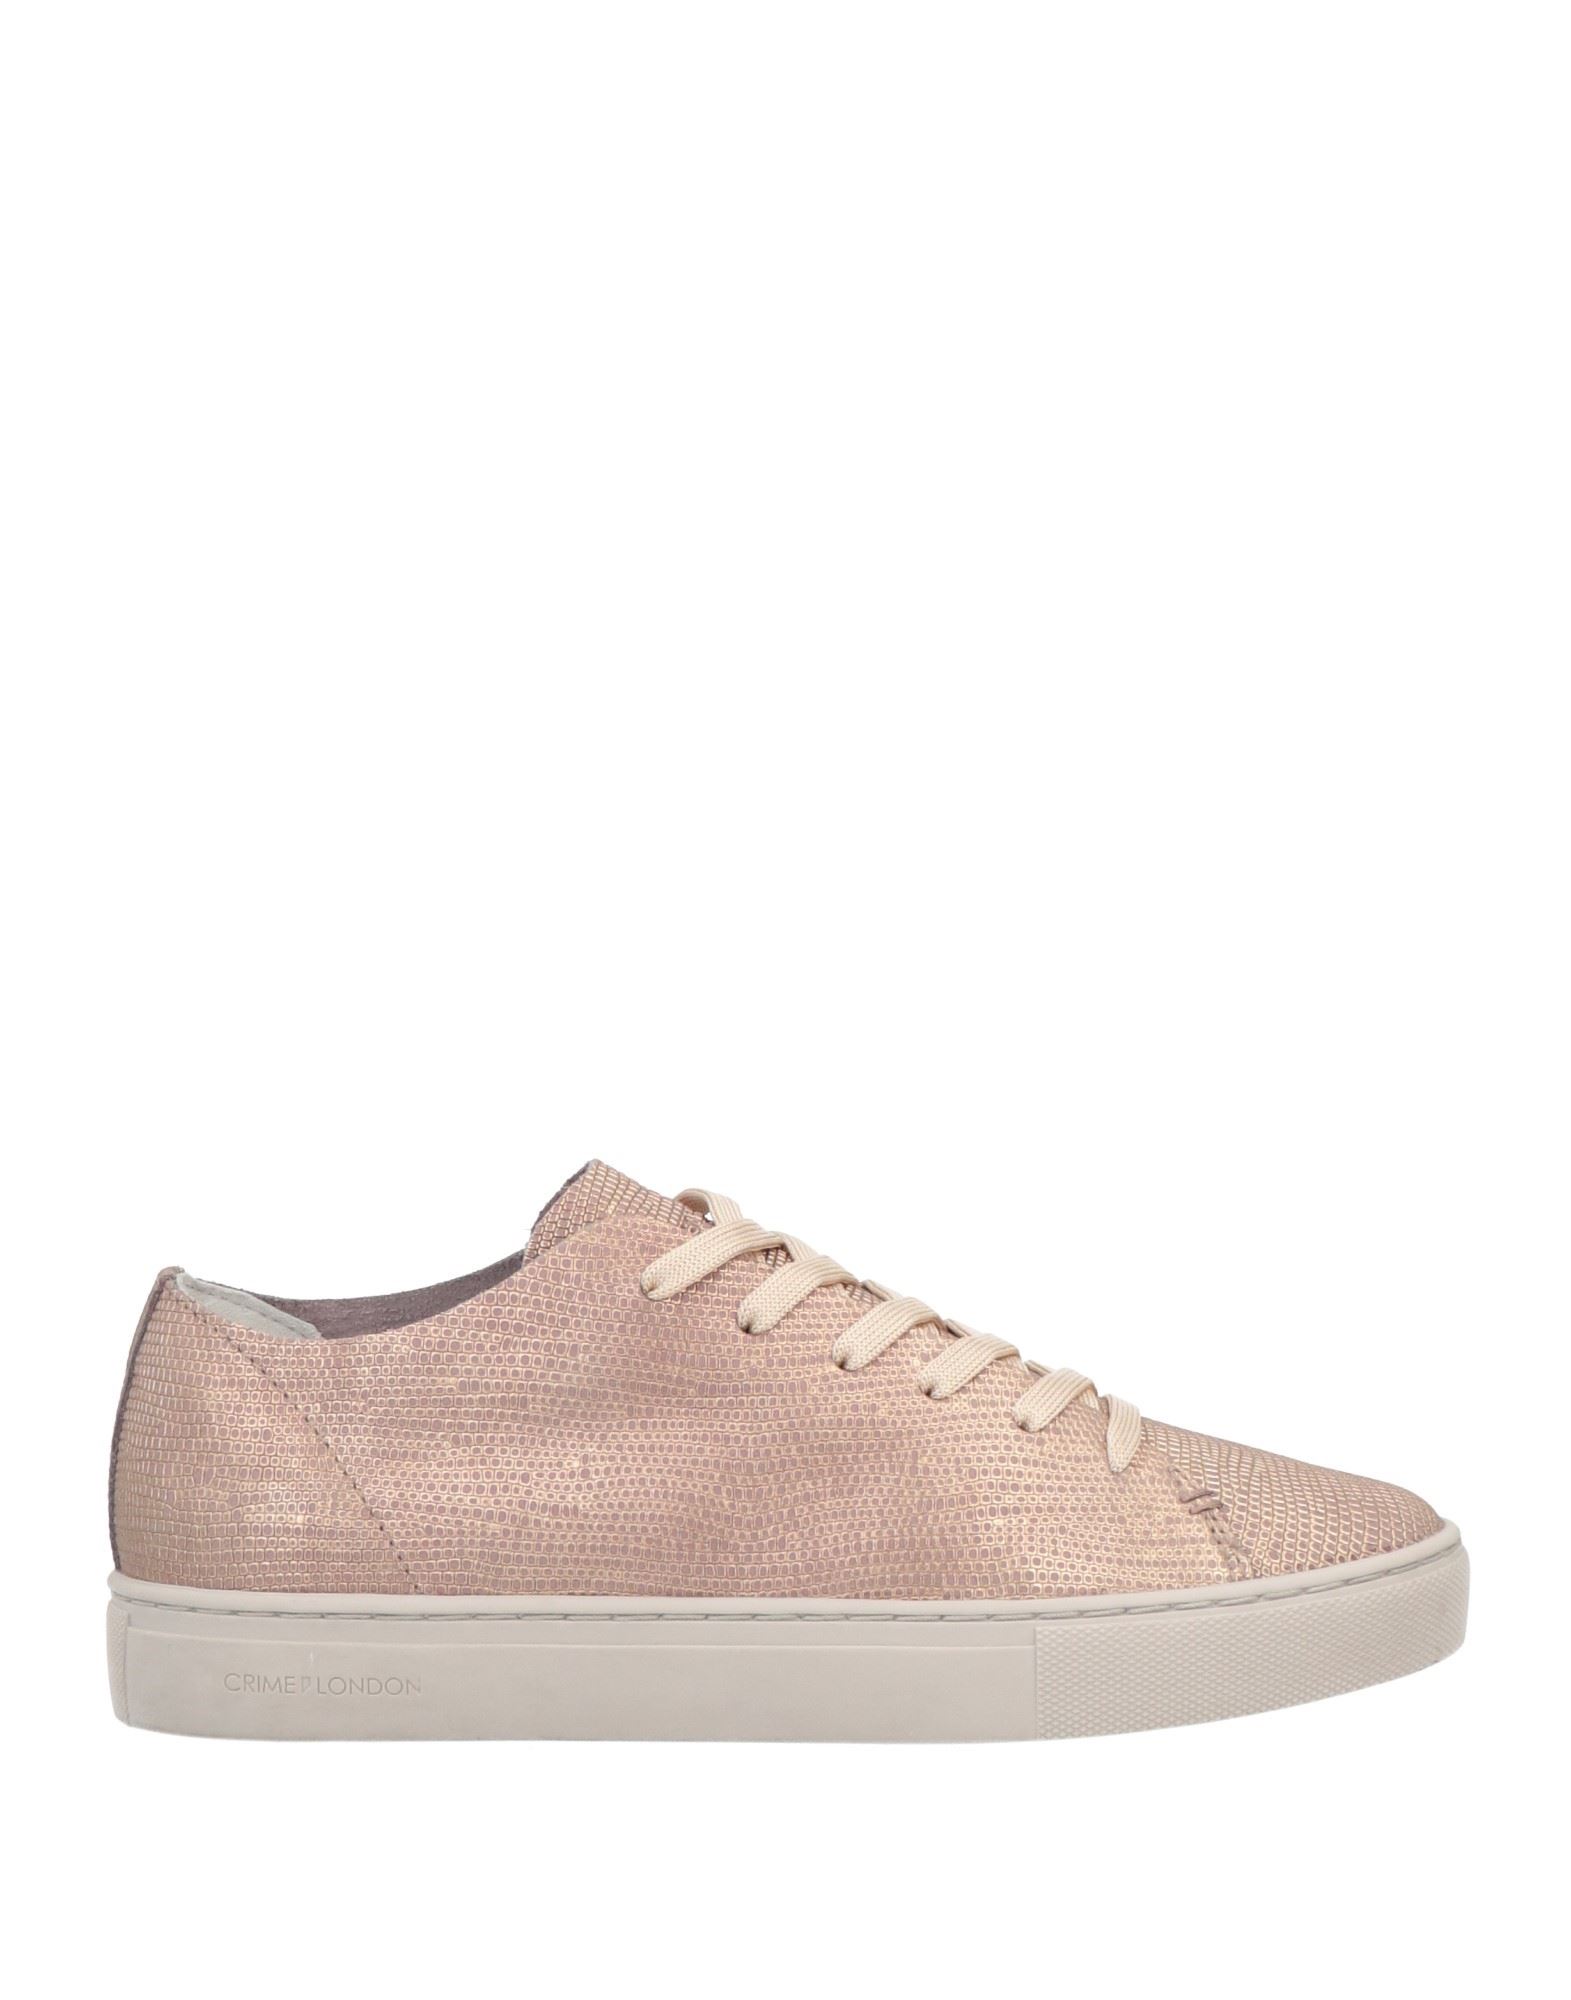 Crime London Sneakers In Rose Gold